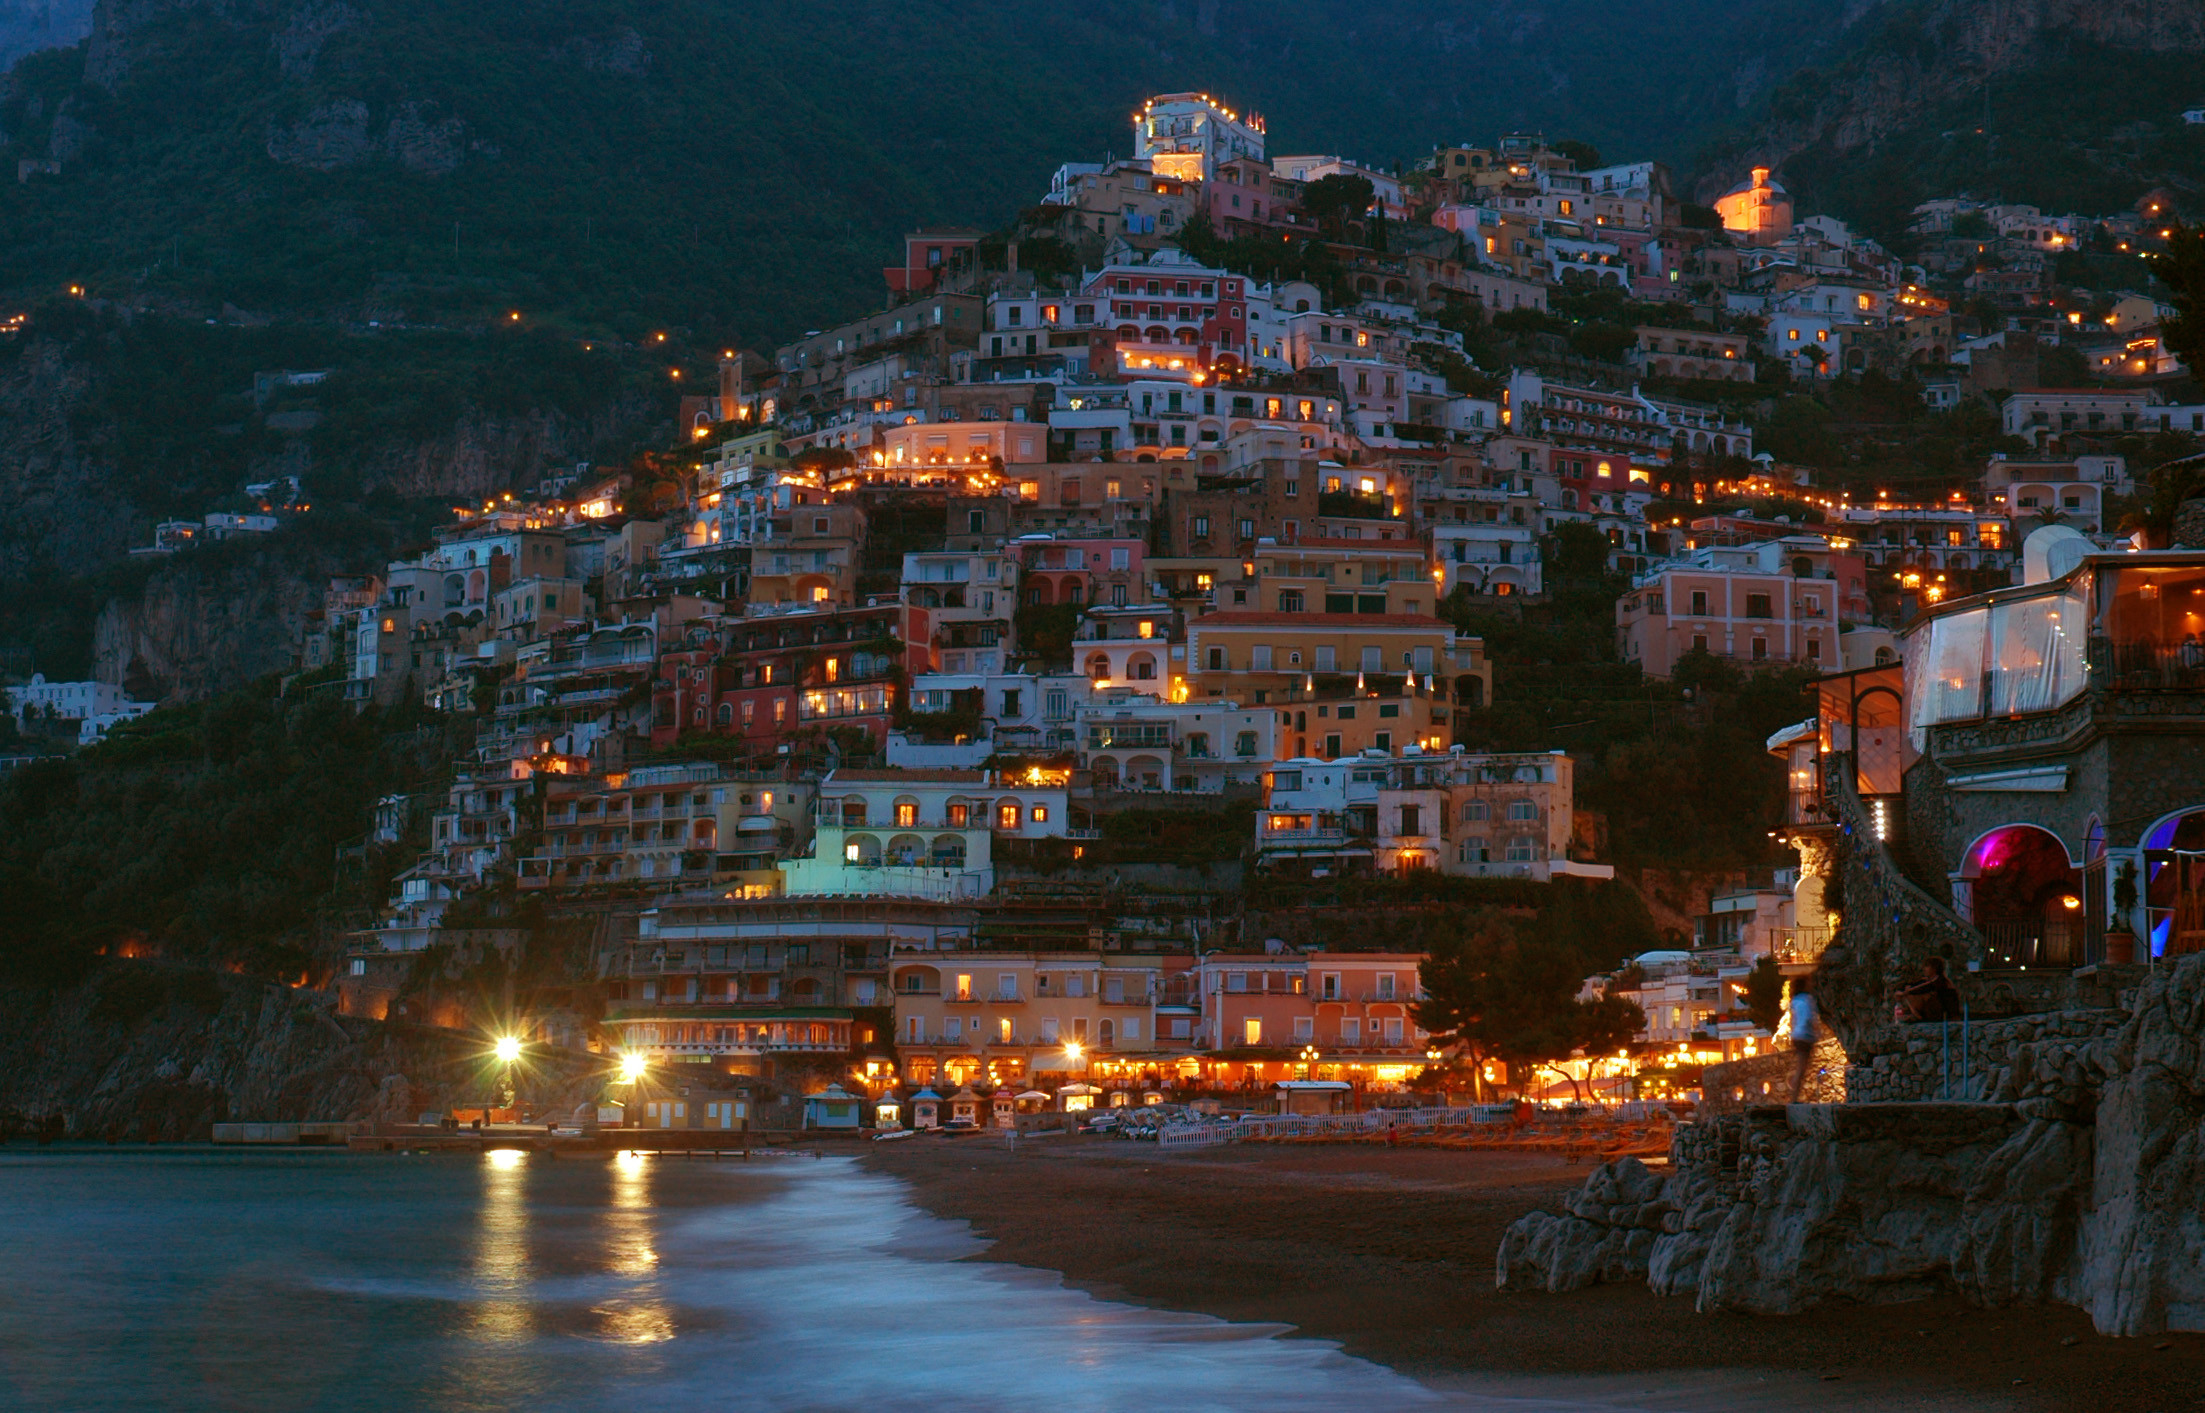 2205x1413 Breathtaking Medieval Town of Positano in Campania, Italy